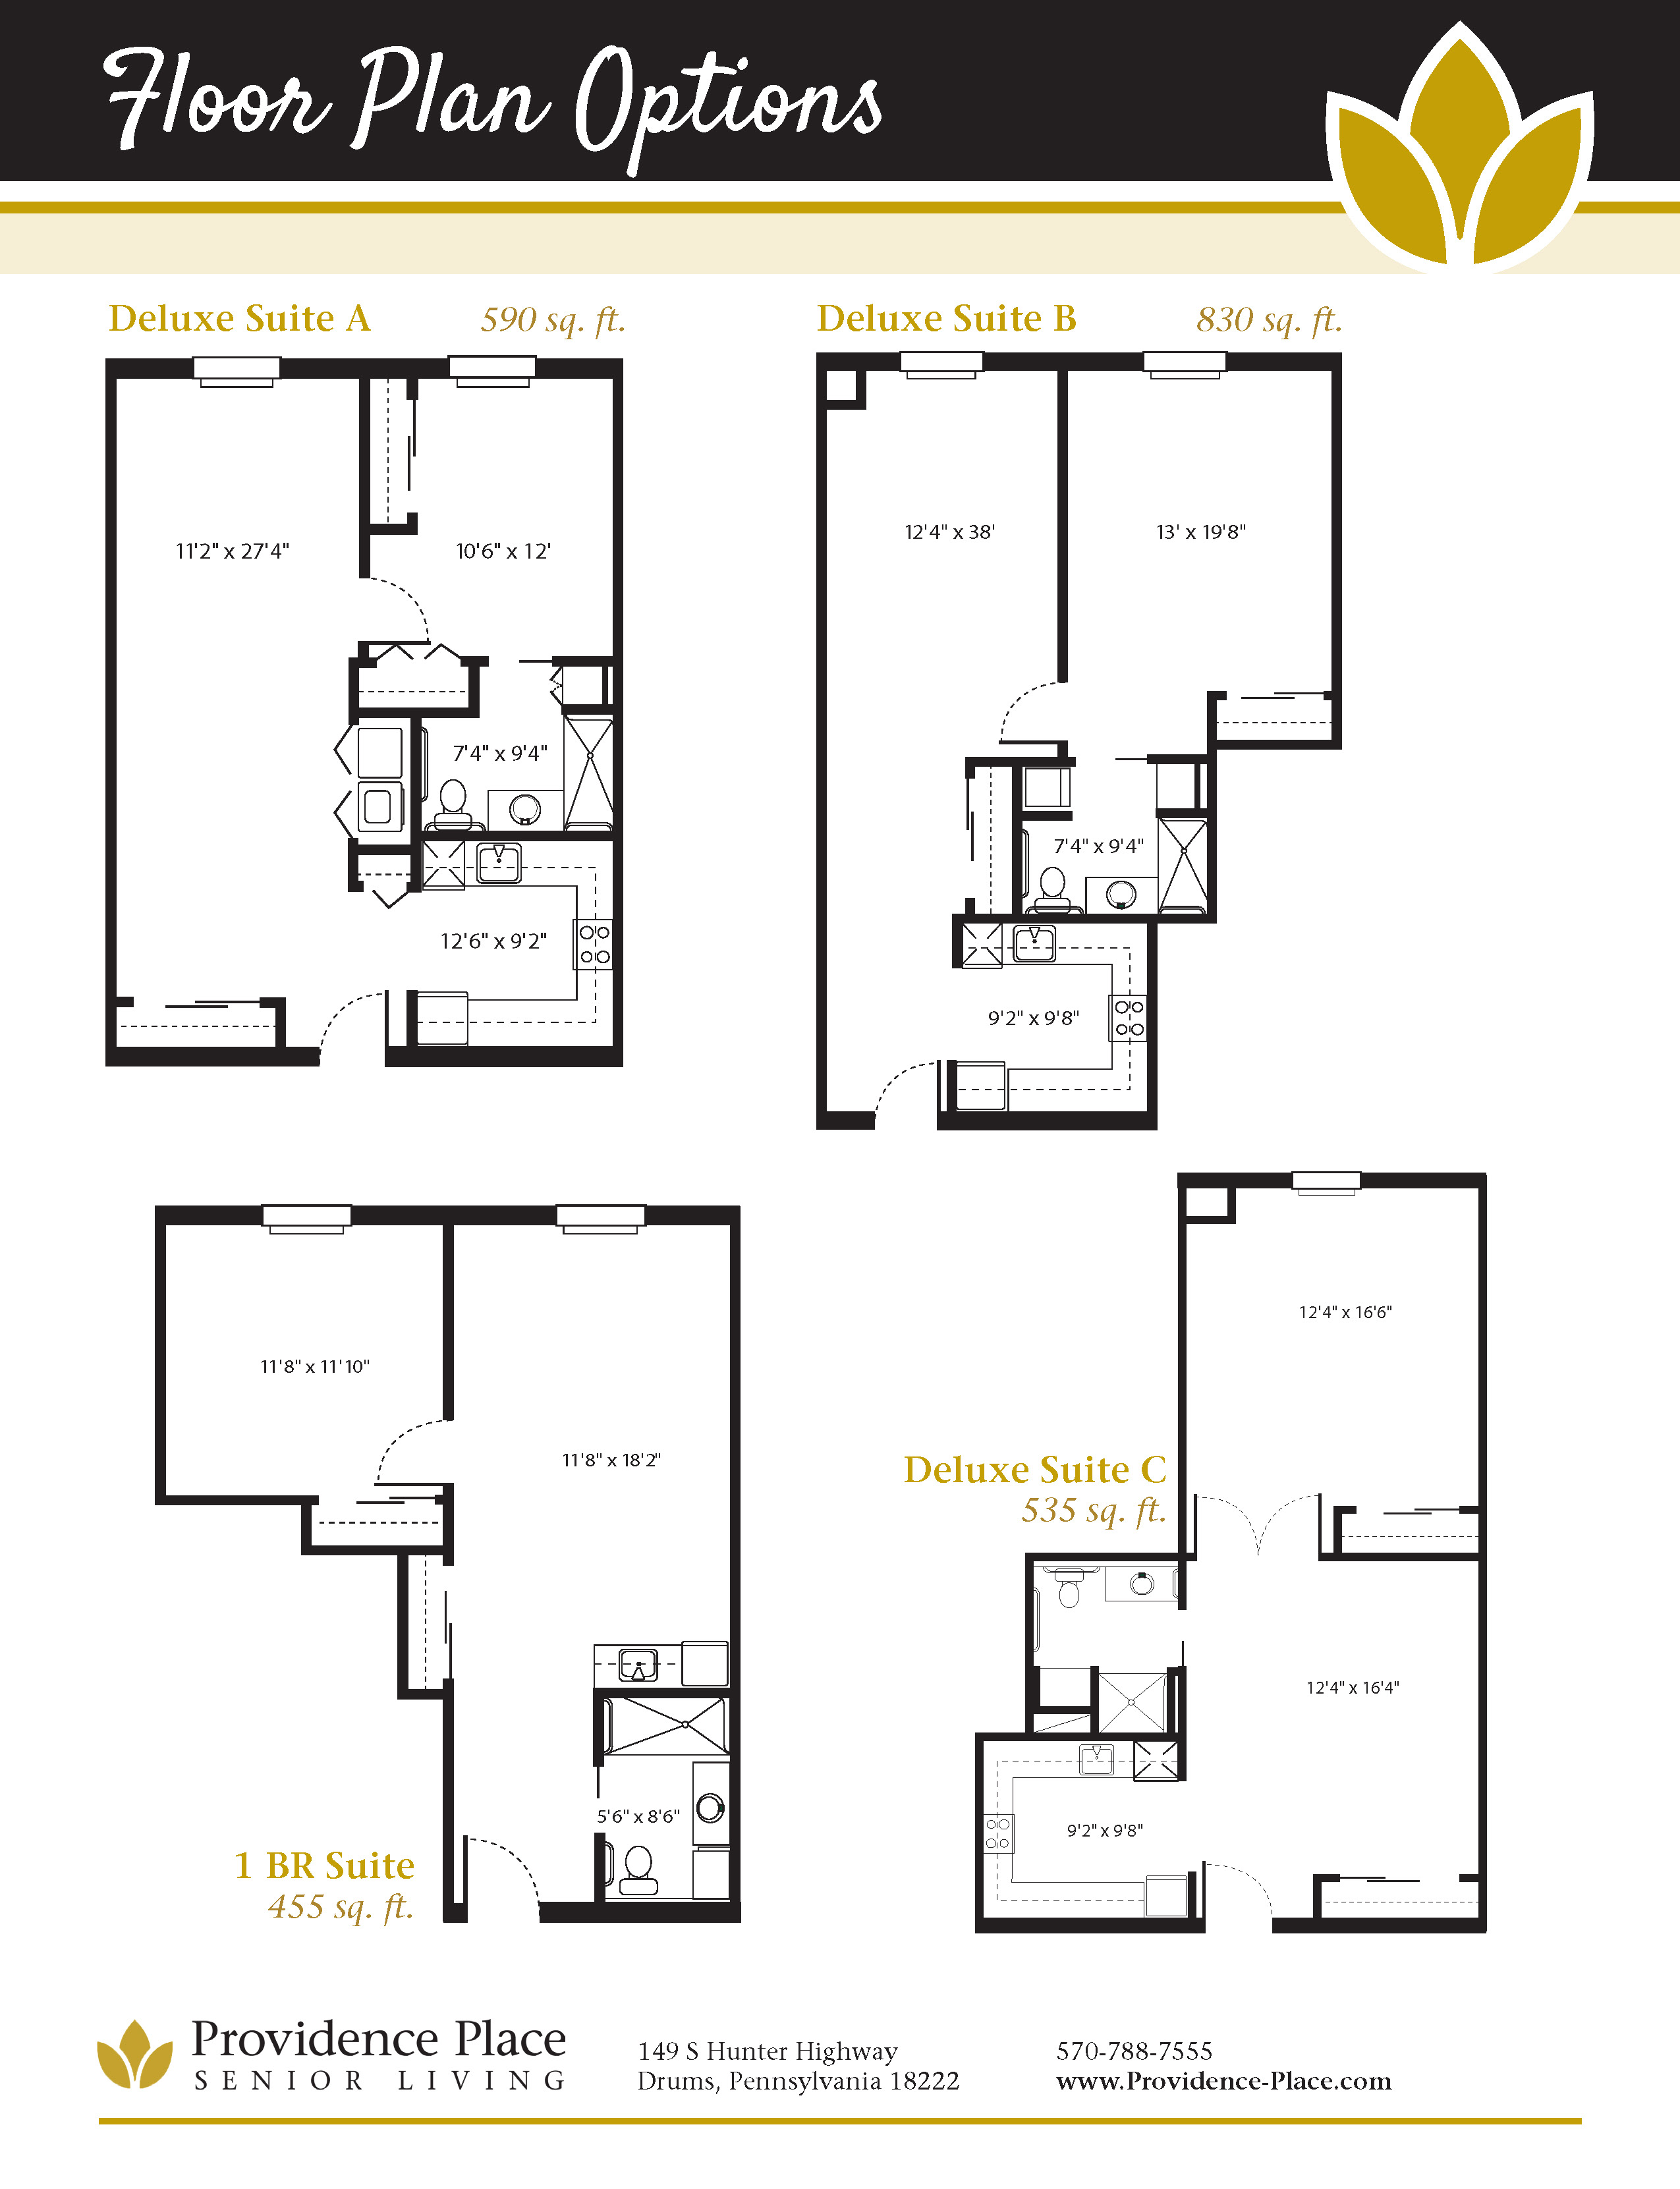 Drums Floor Plans Providence Place